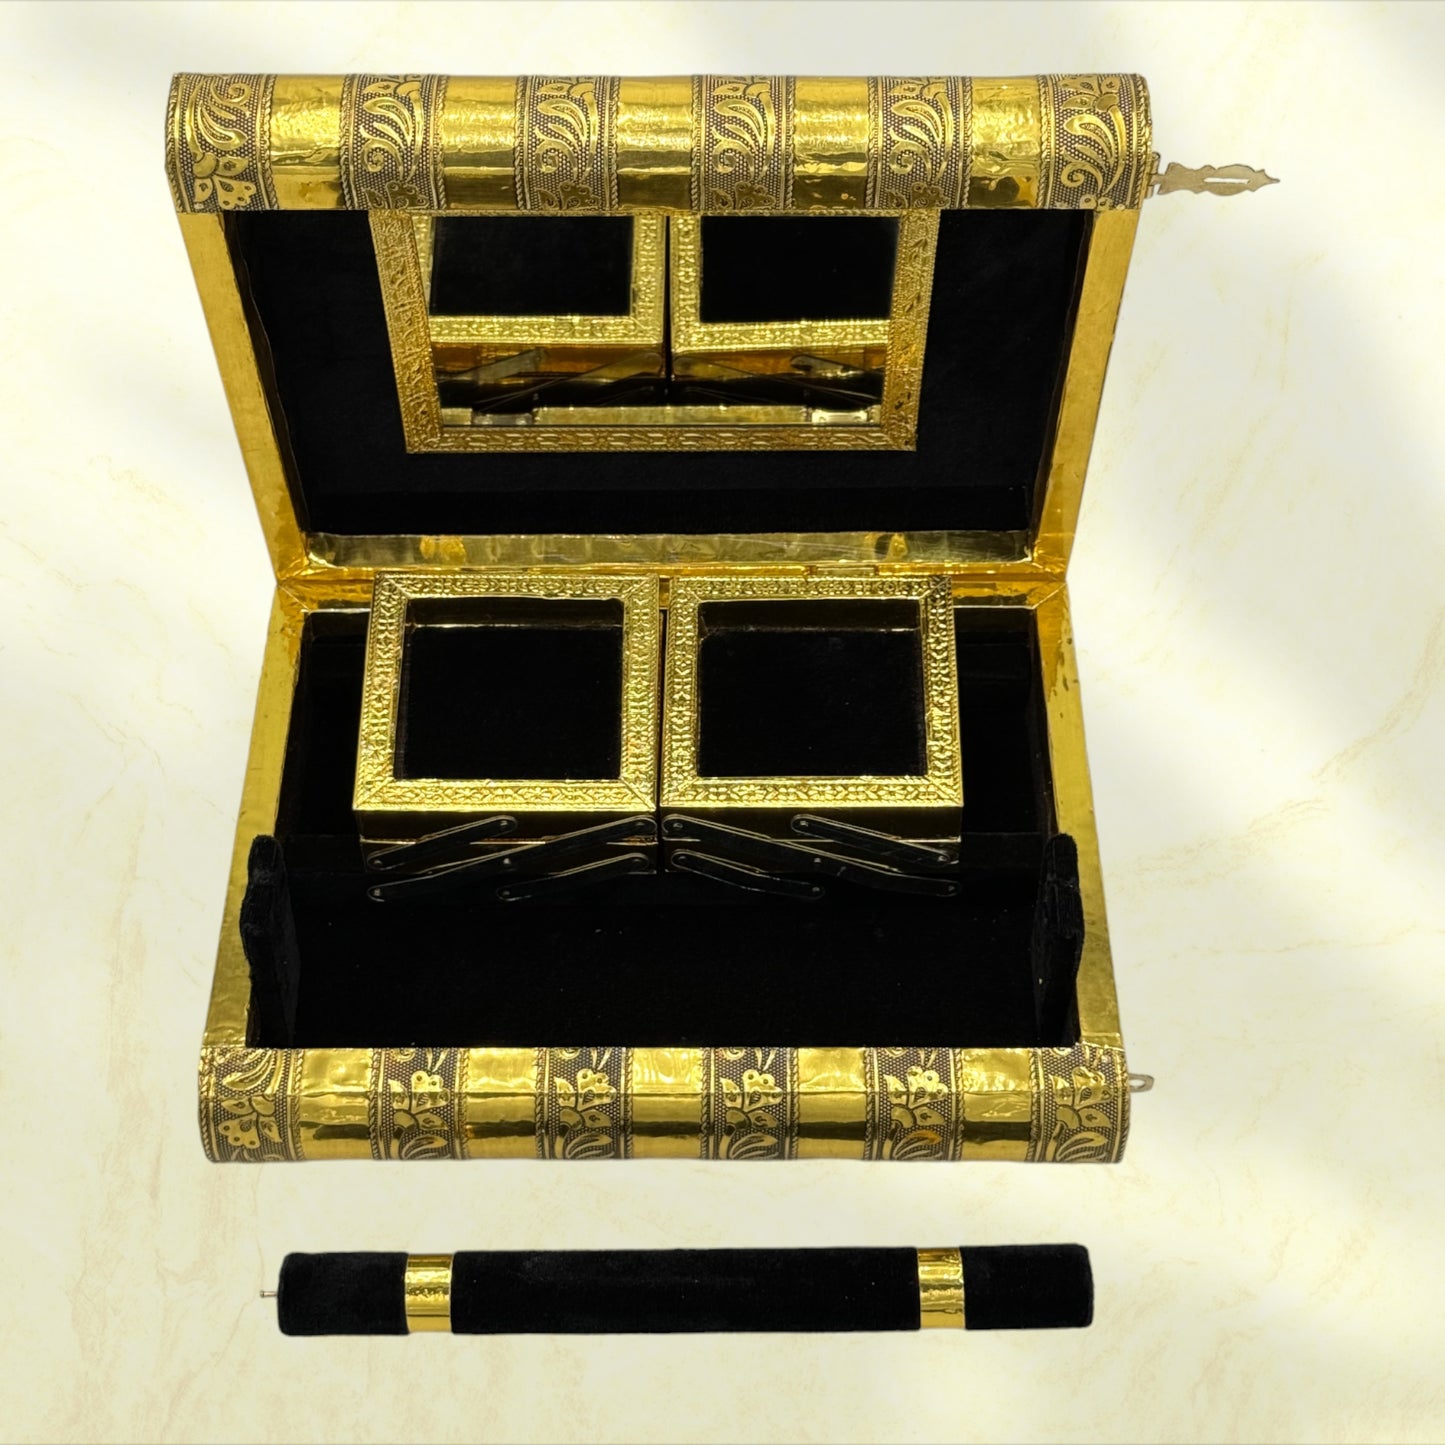 Majestic Indian Tiger Handmade Jewelry Holder Box - Tortuna shows black lined box open with dowel removed and sitting outside of the box